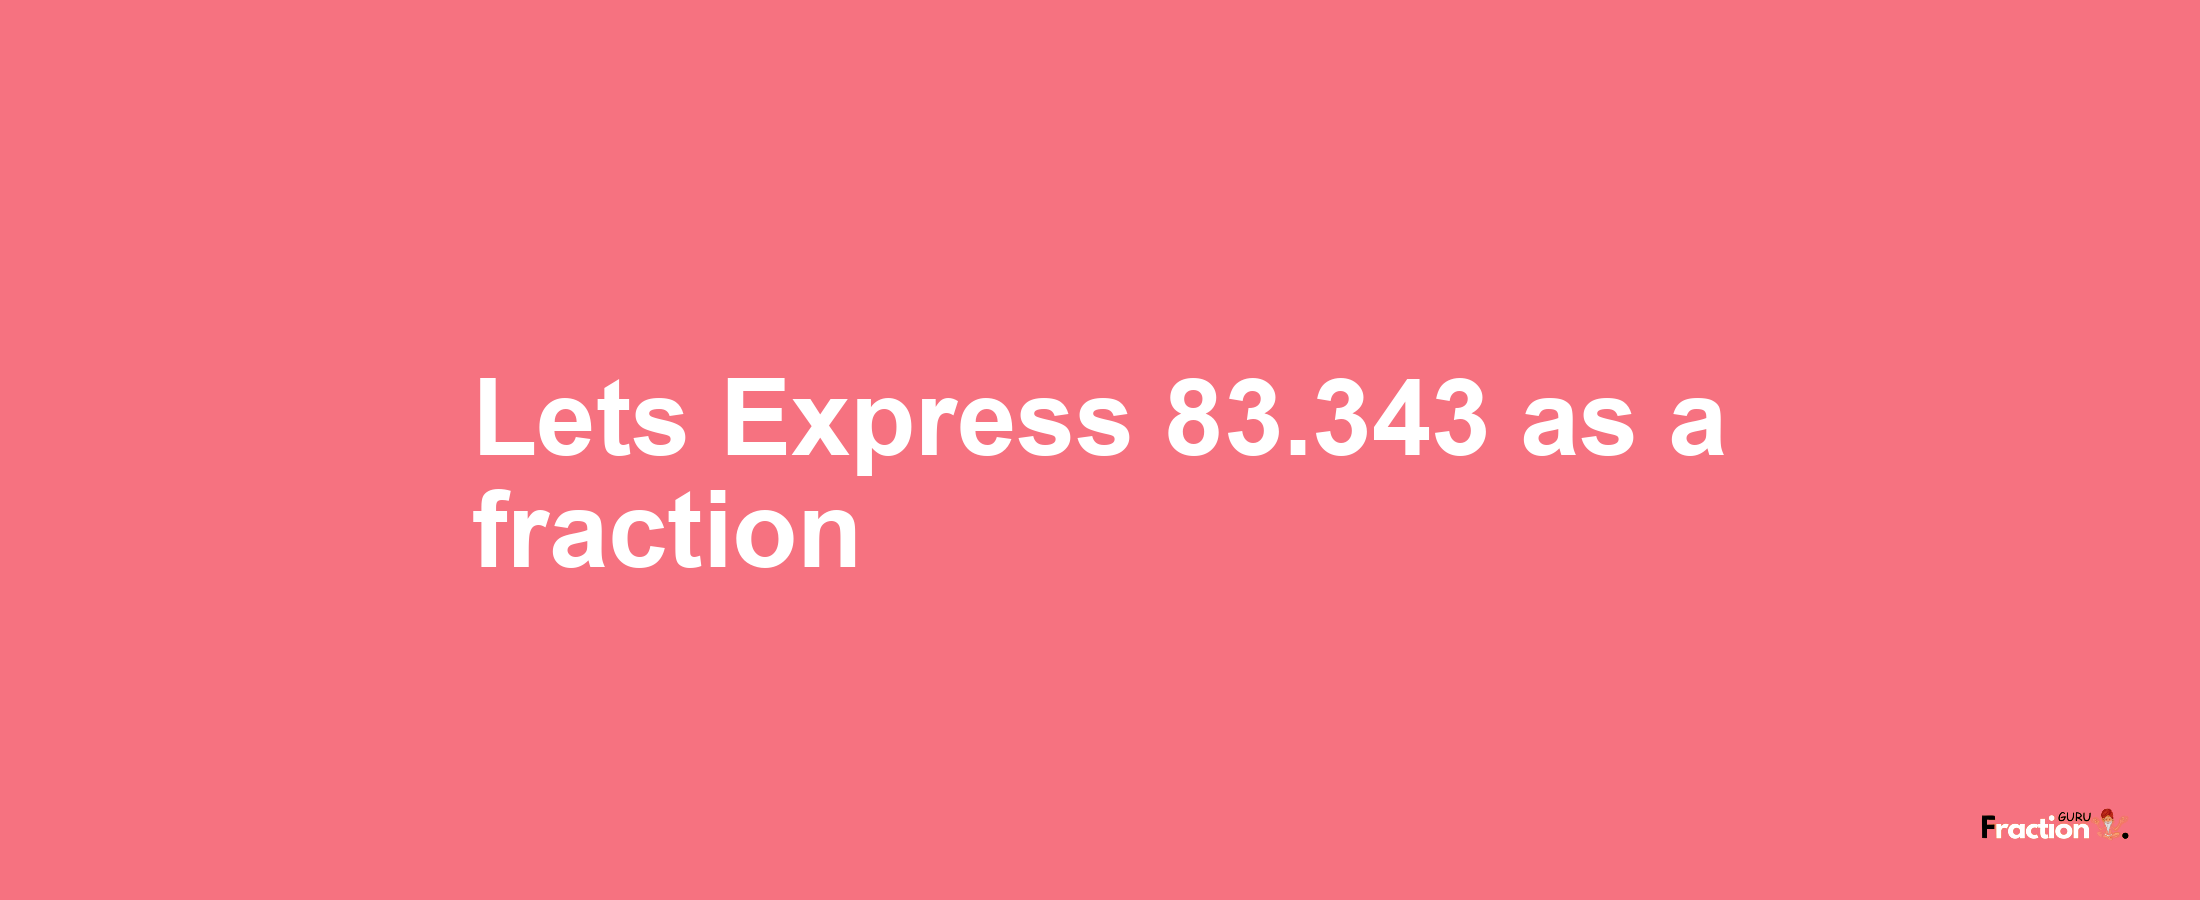 Lets Express 83.343 as afraction